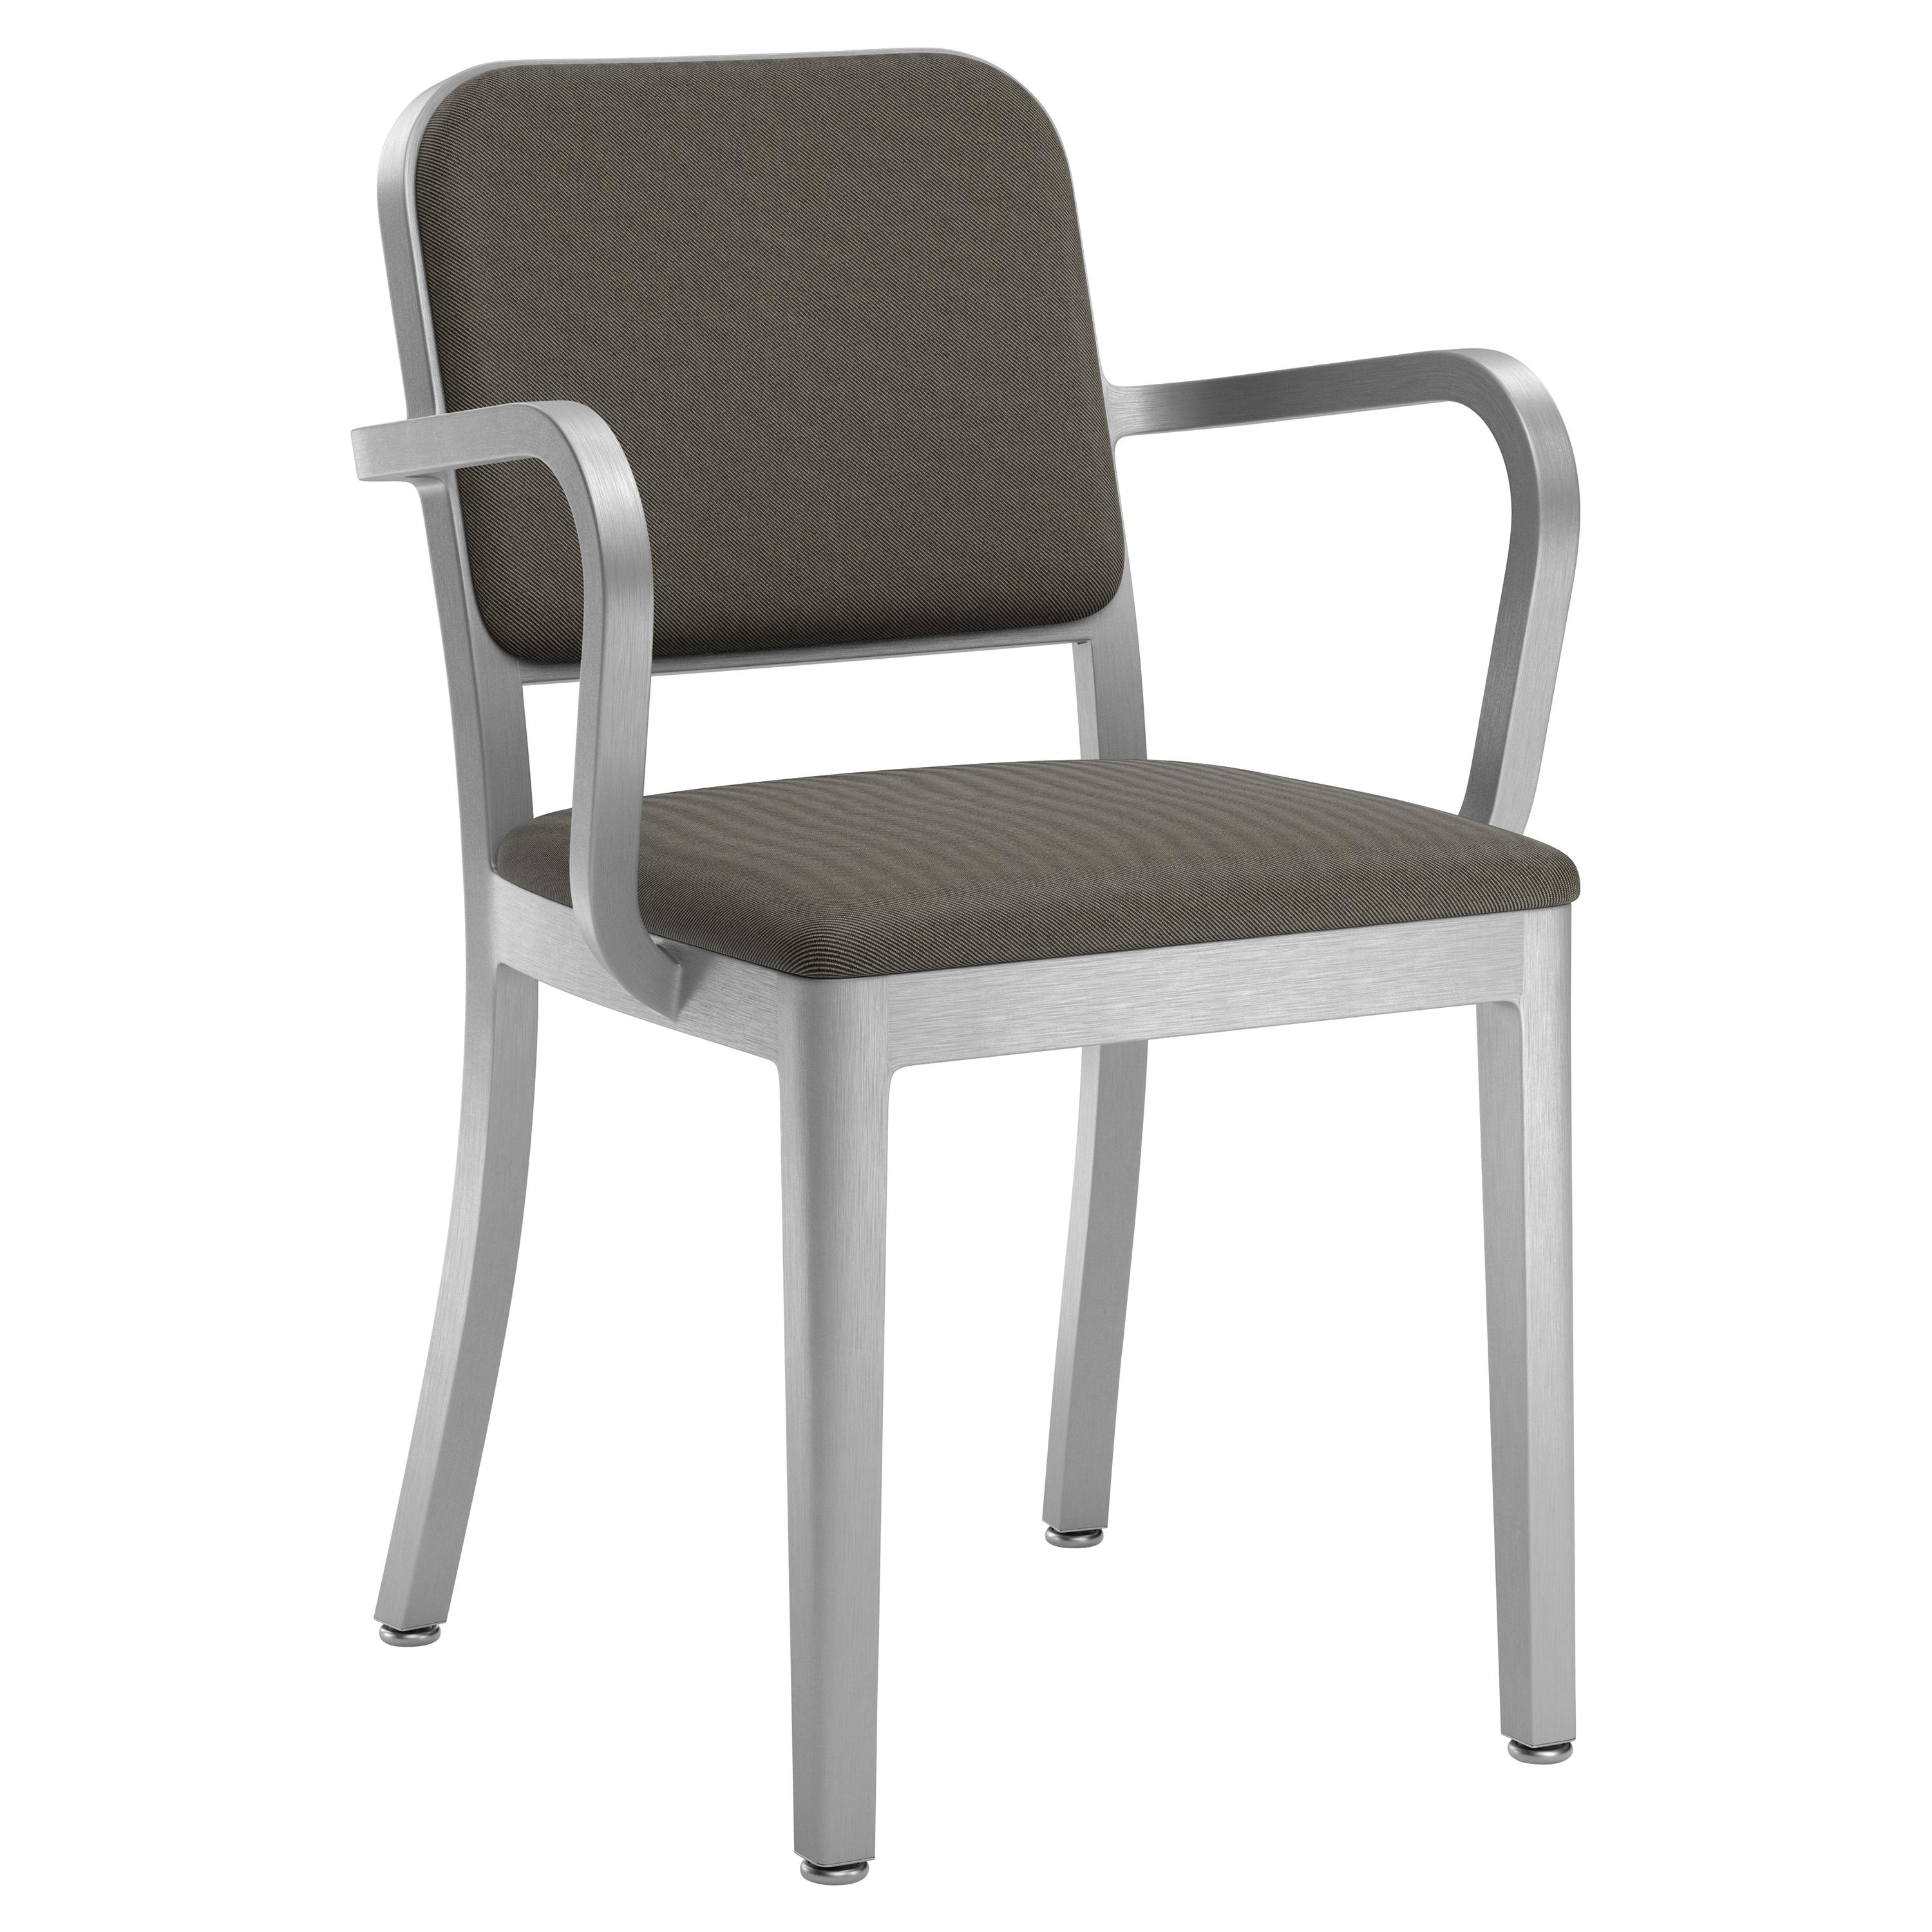 Emeco Navy Officer Armchair in Black Fabric with Brushed Aluminum Frame